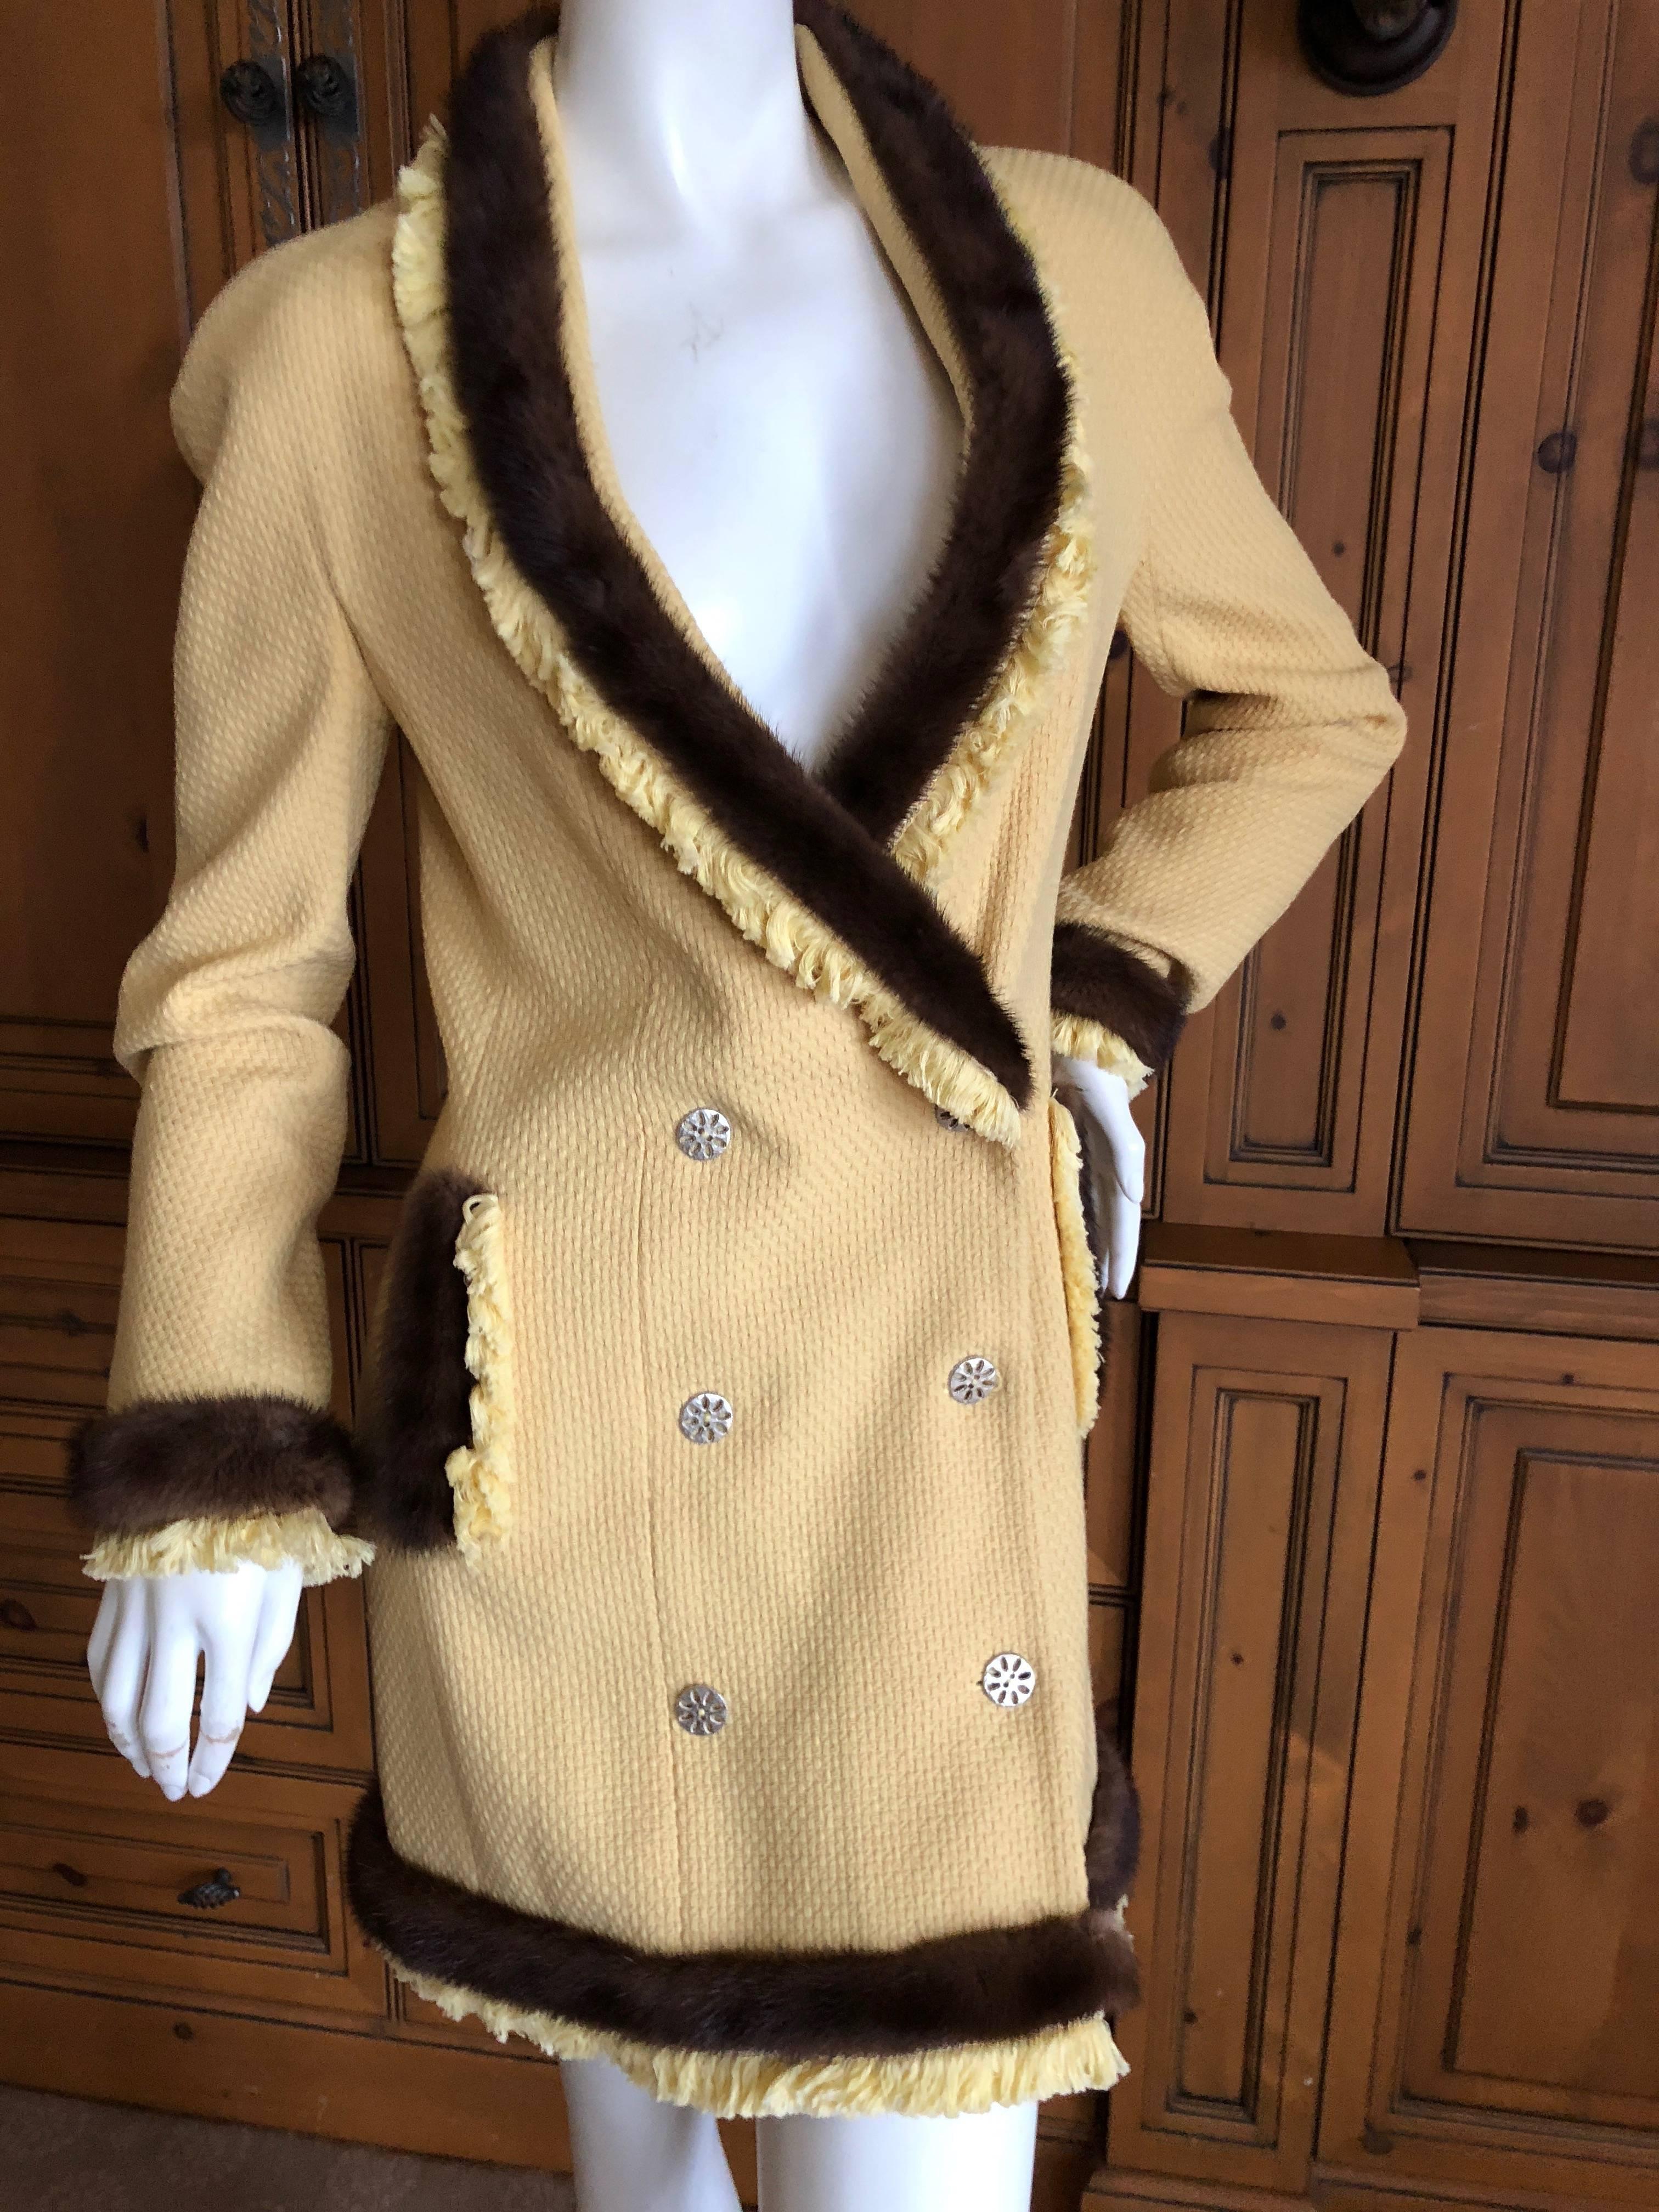 Christian Dior by John Galliano Autumn 1997 Mink Trim Yellow Boucle Coat Dress For Sale 1